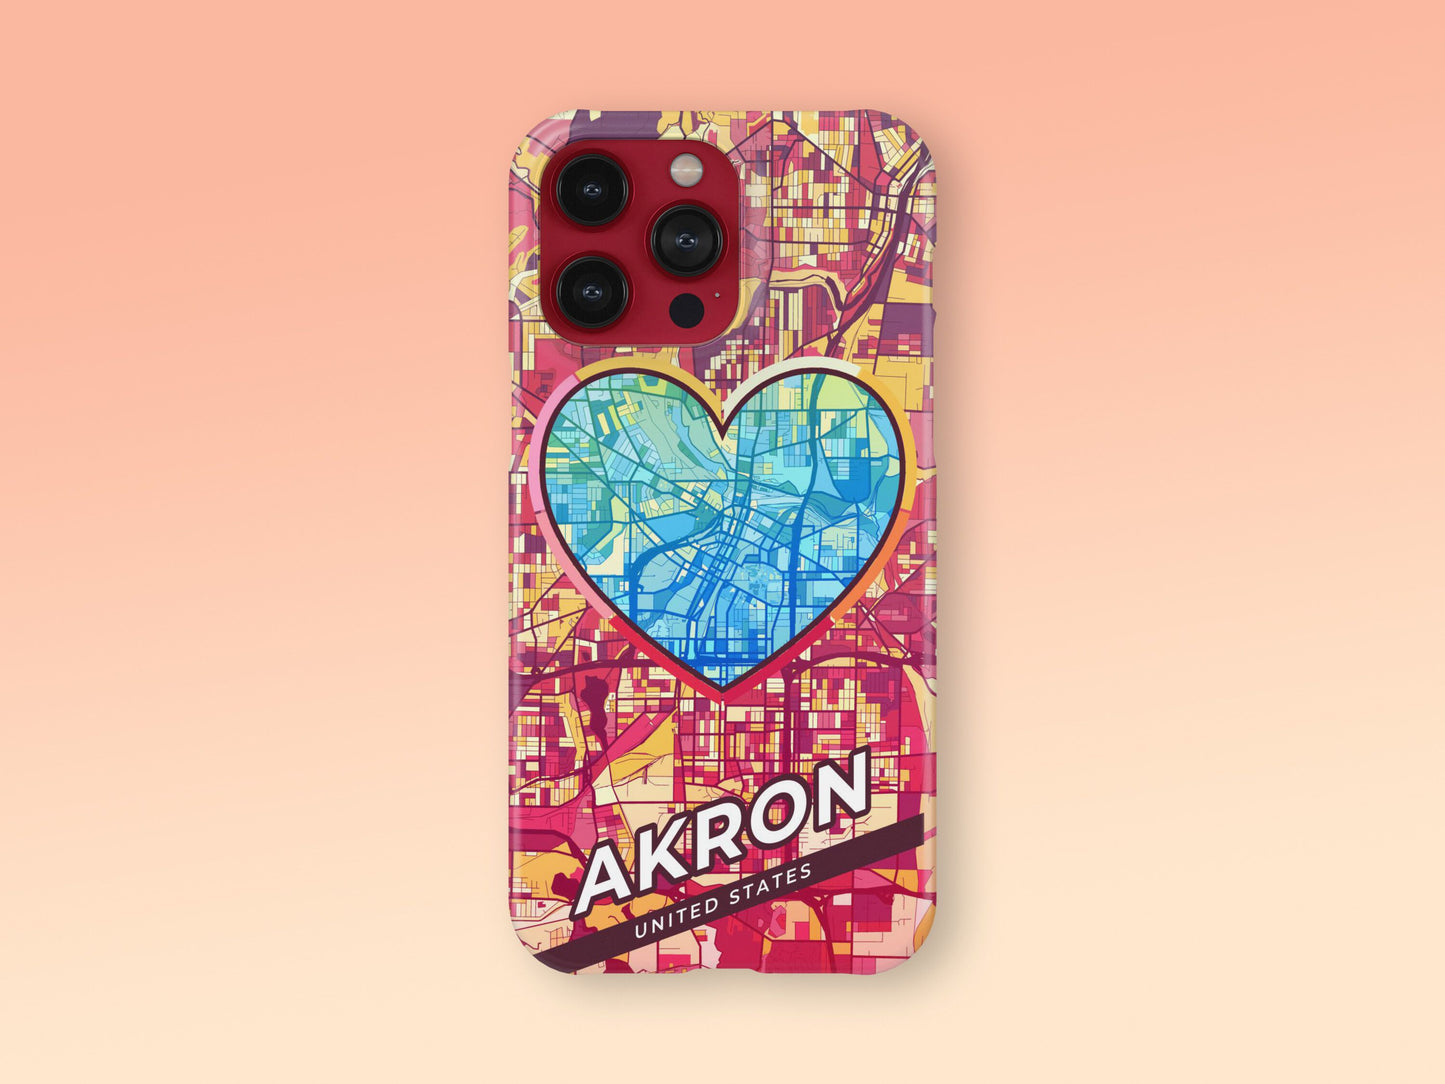 Akron Ohio slim phone case with colorful icon. Birthday, wedding or housewarming gift. Couple match cases. 2